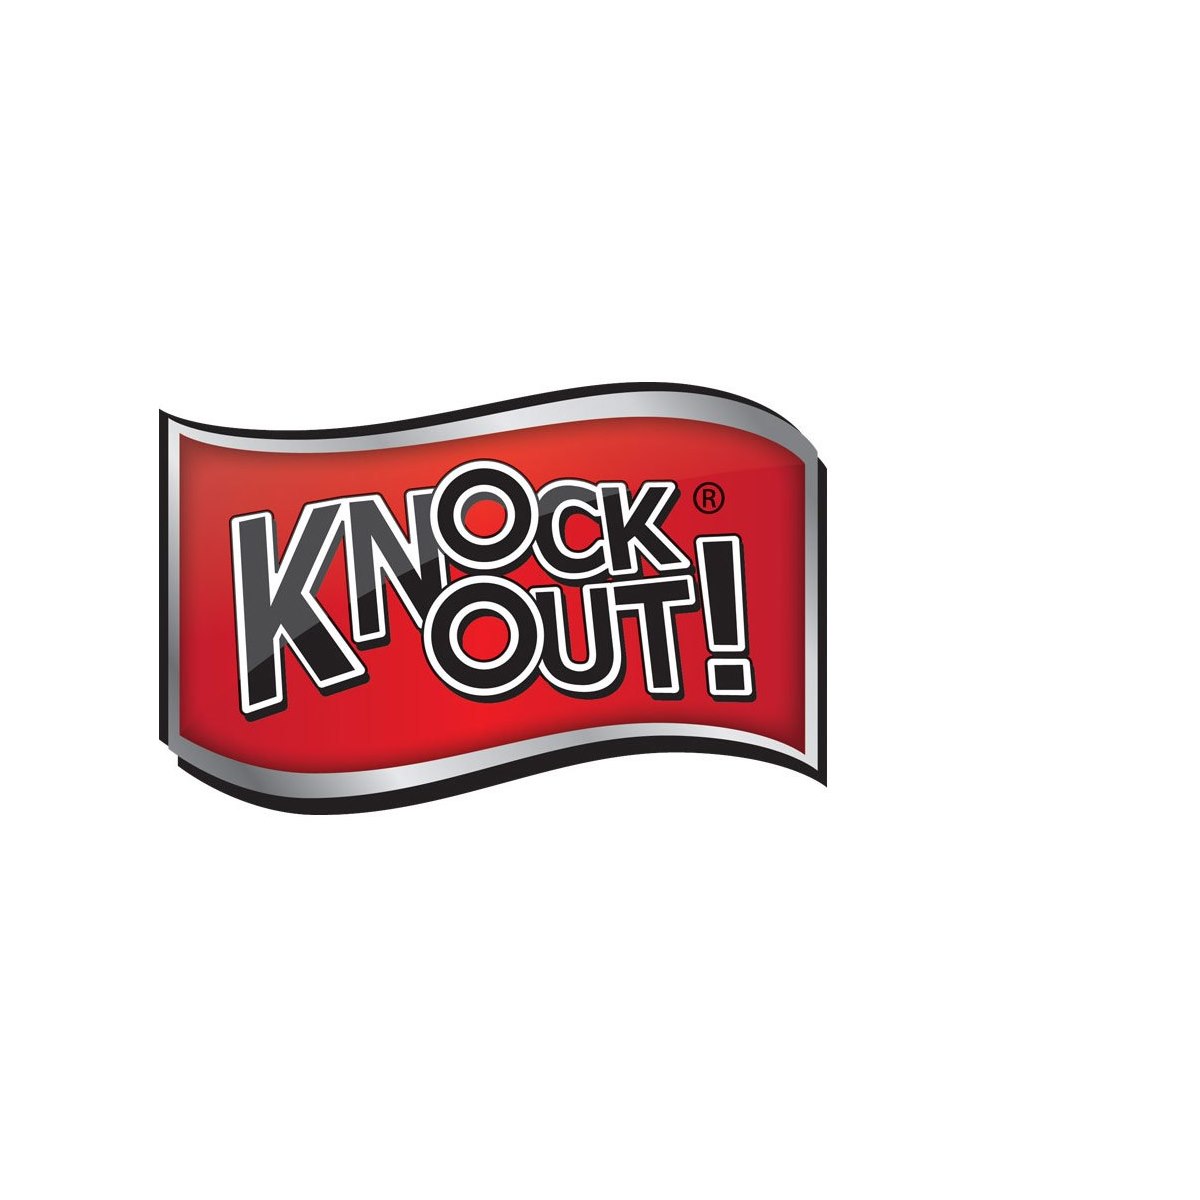 Where to Buy Knock Out Products